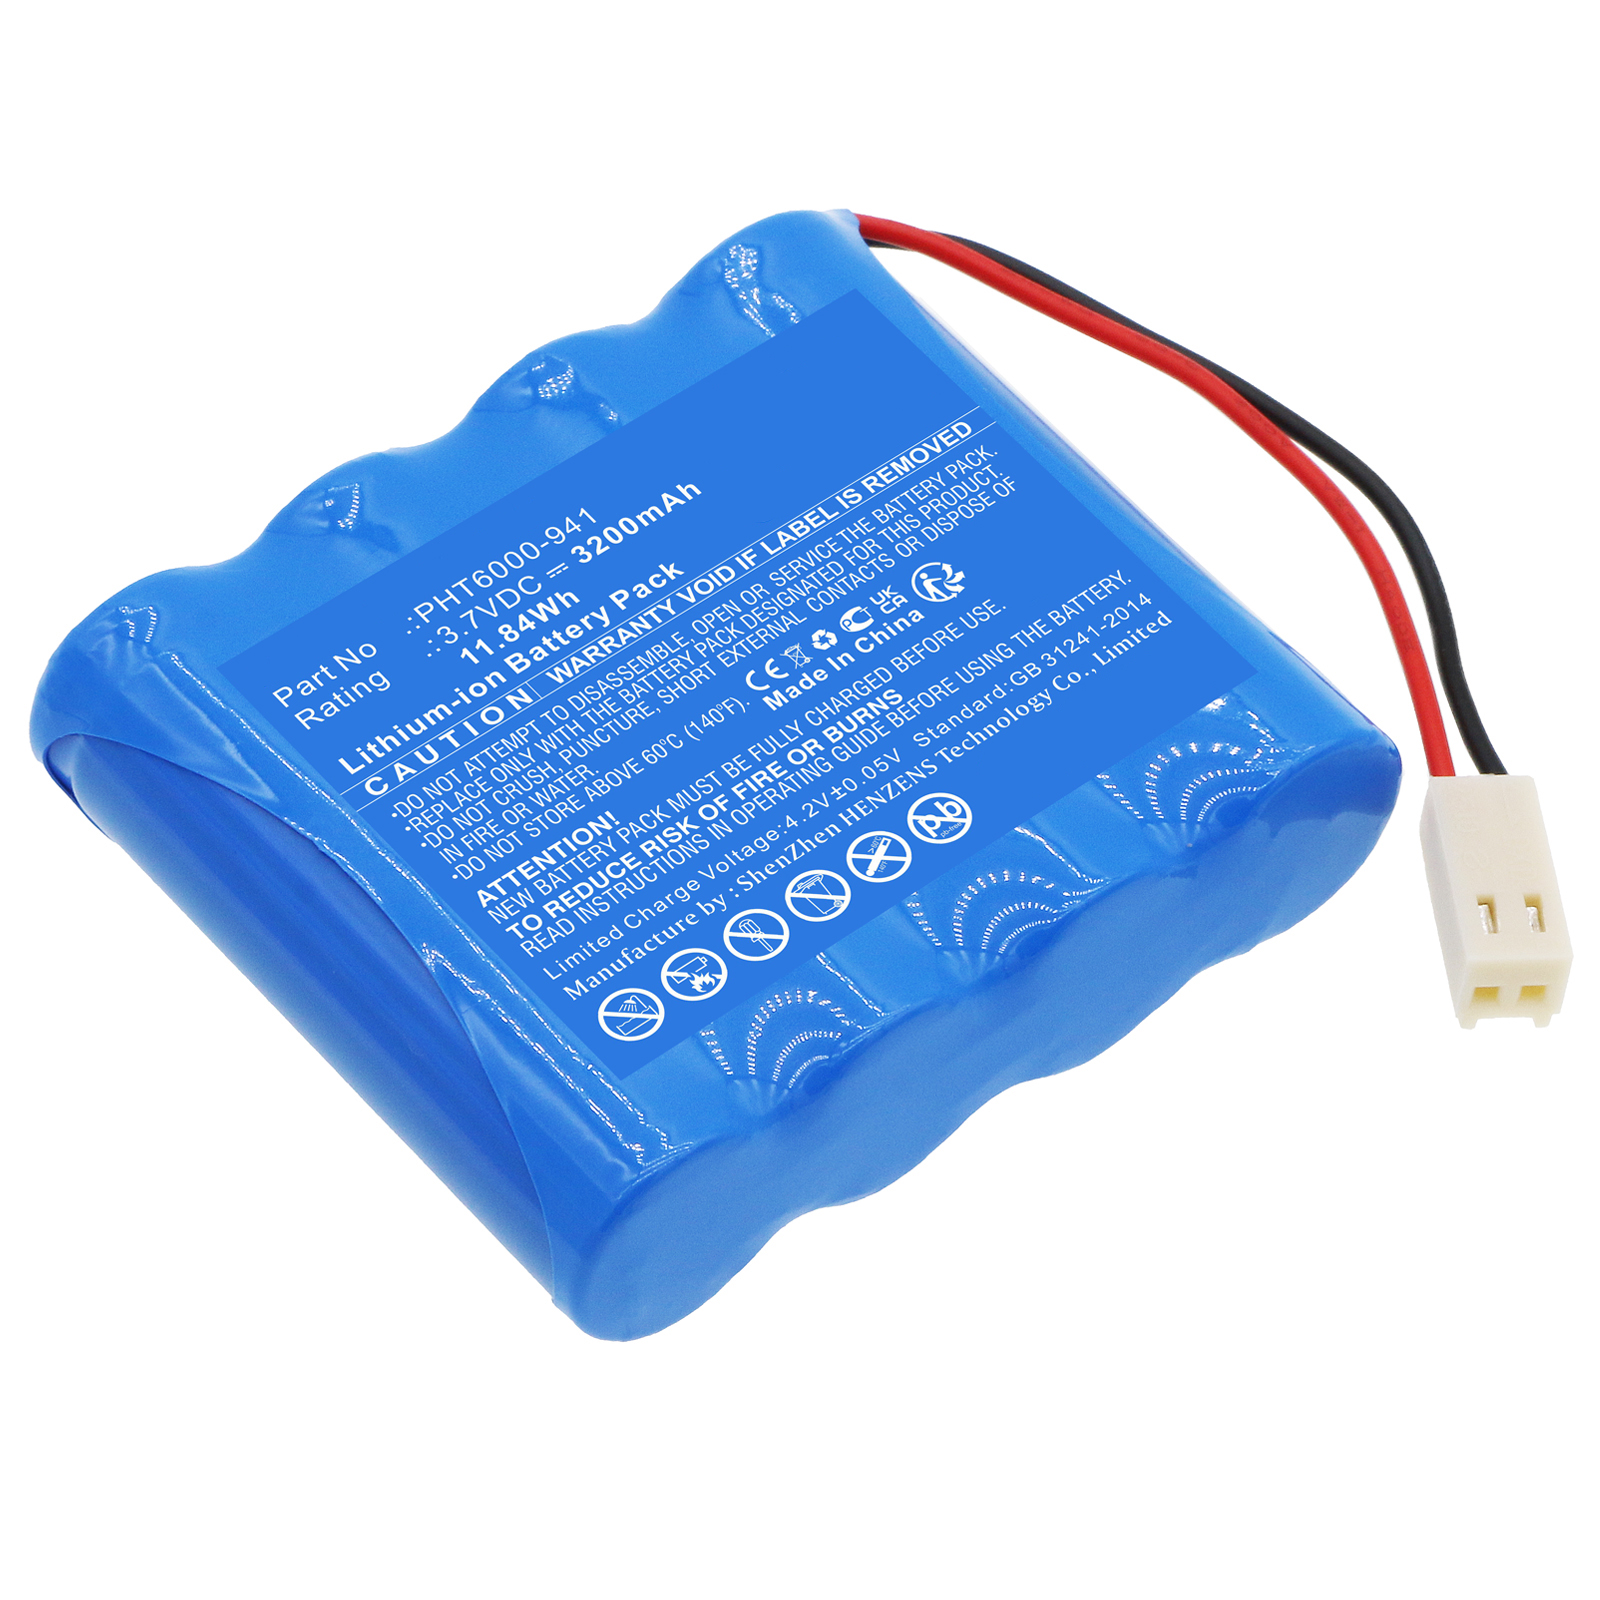 Synergy Digital Equipment Battery, Compatible with Phase PHT6000-941 Equipment Battery (Li-ion, 3.7V, 3200mAh)